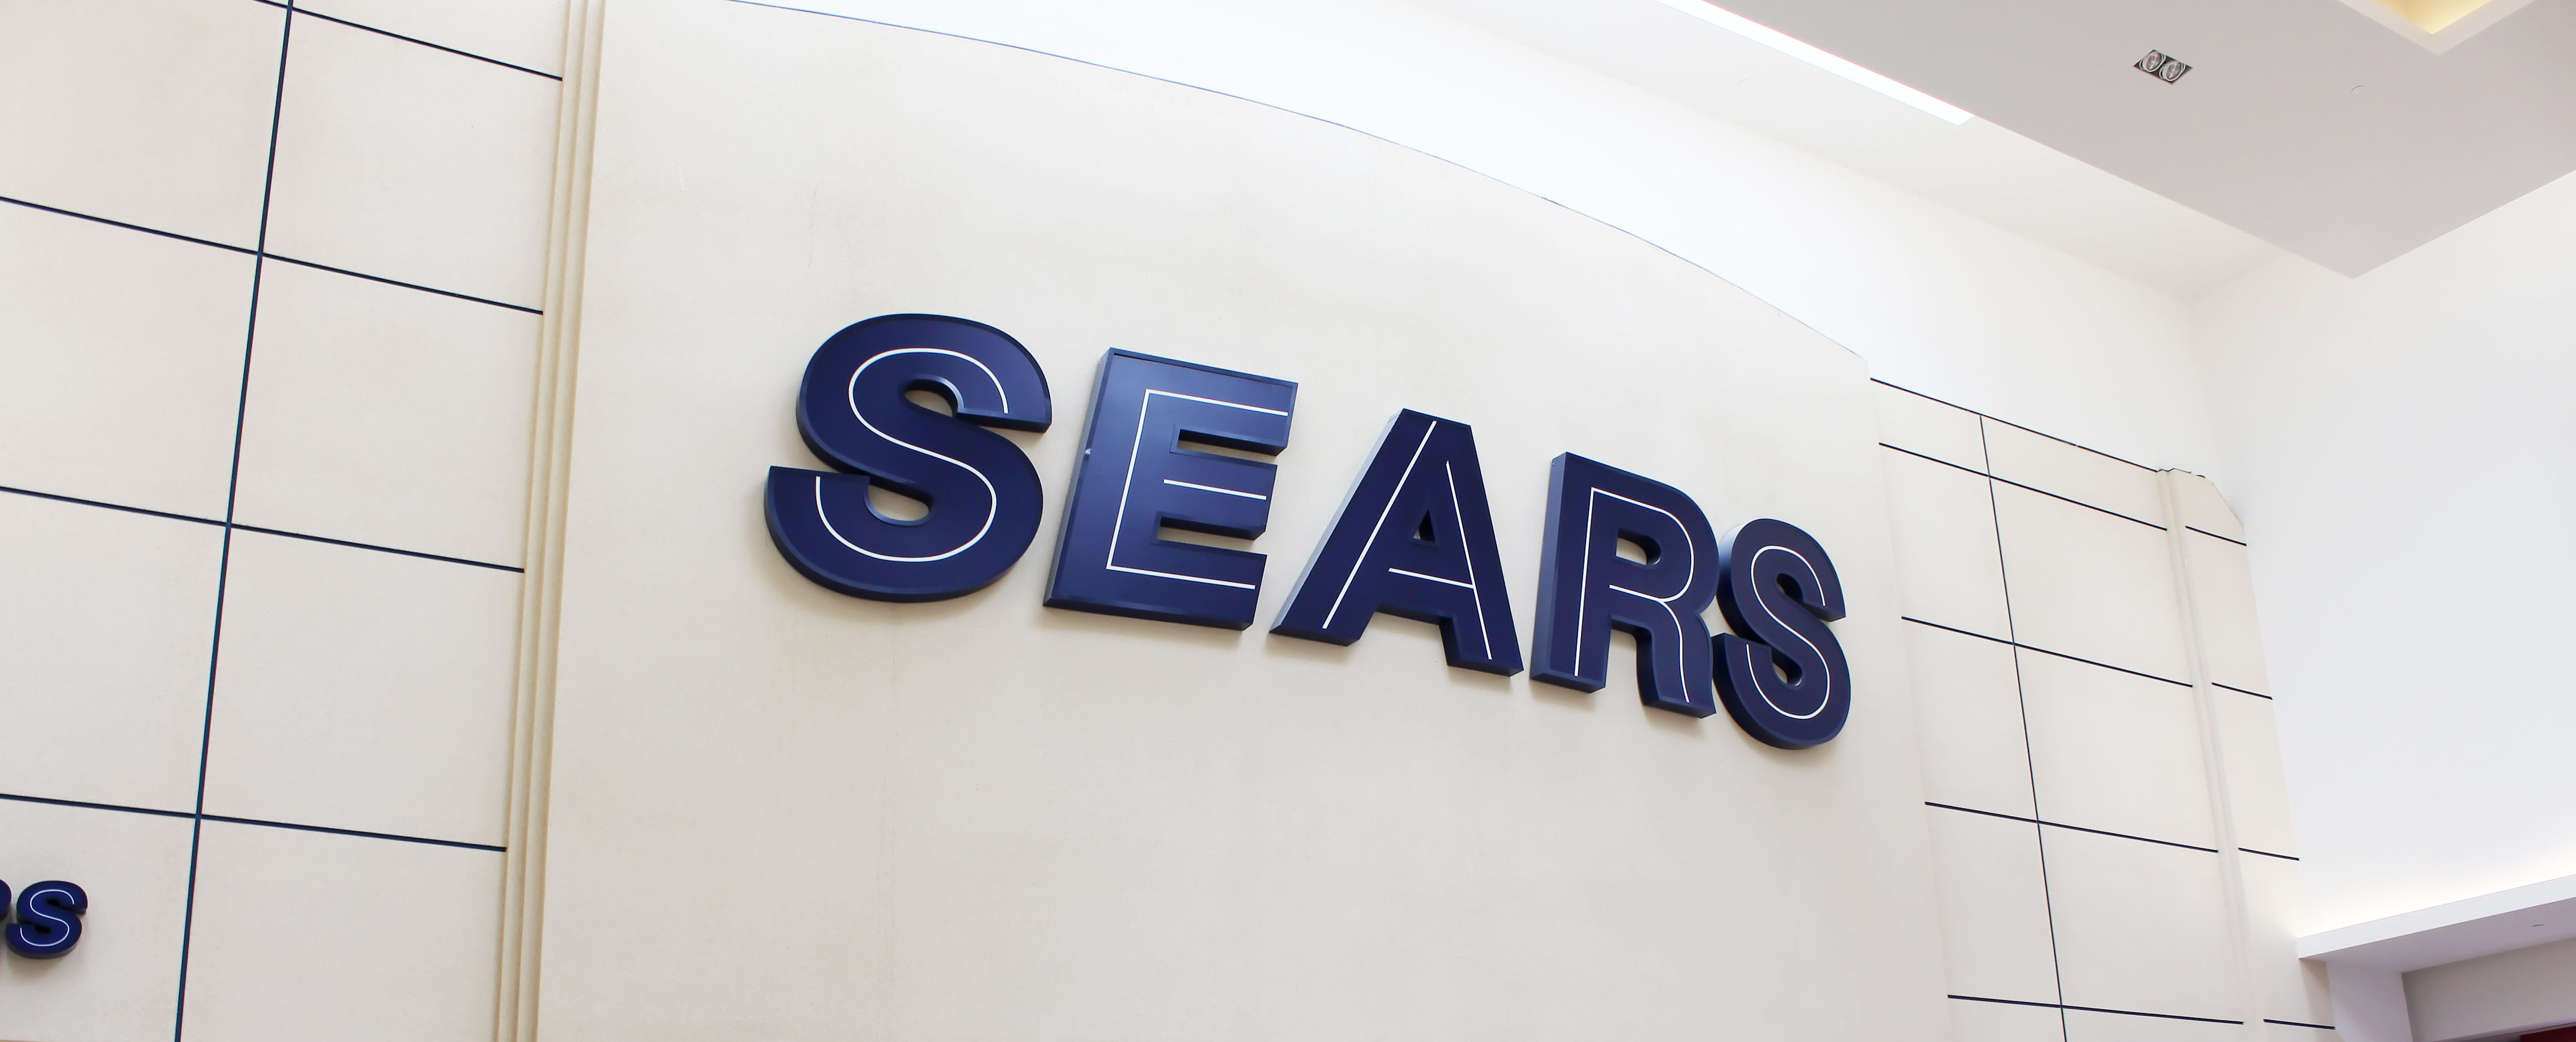 Sears Home Services may be acquired by Service.com